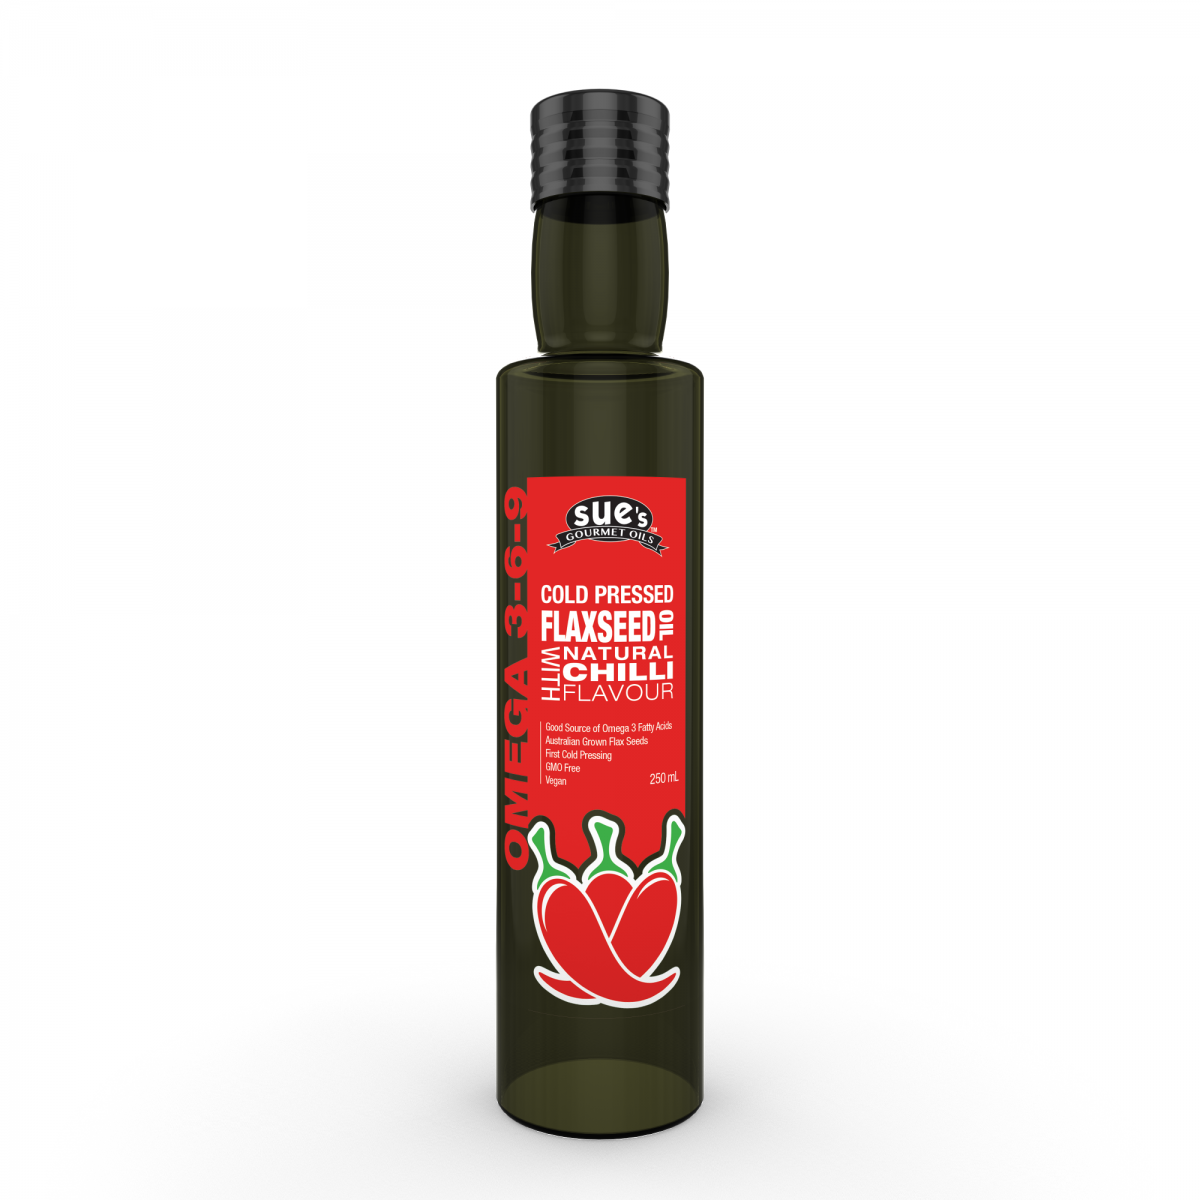 Cold Pressed Flaxseed Oil with Chilli Front